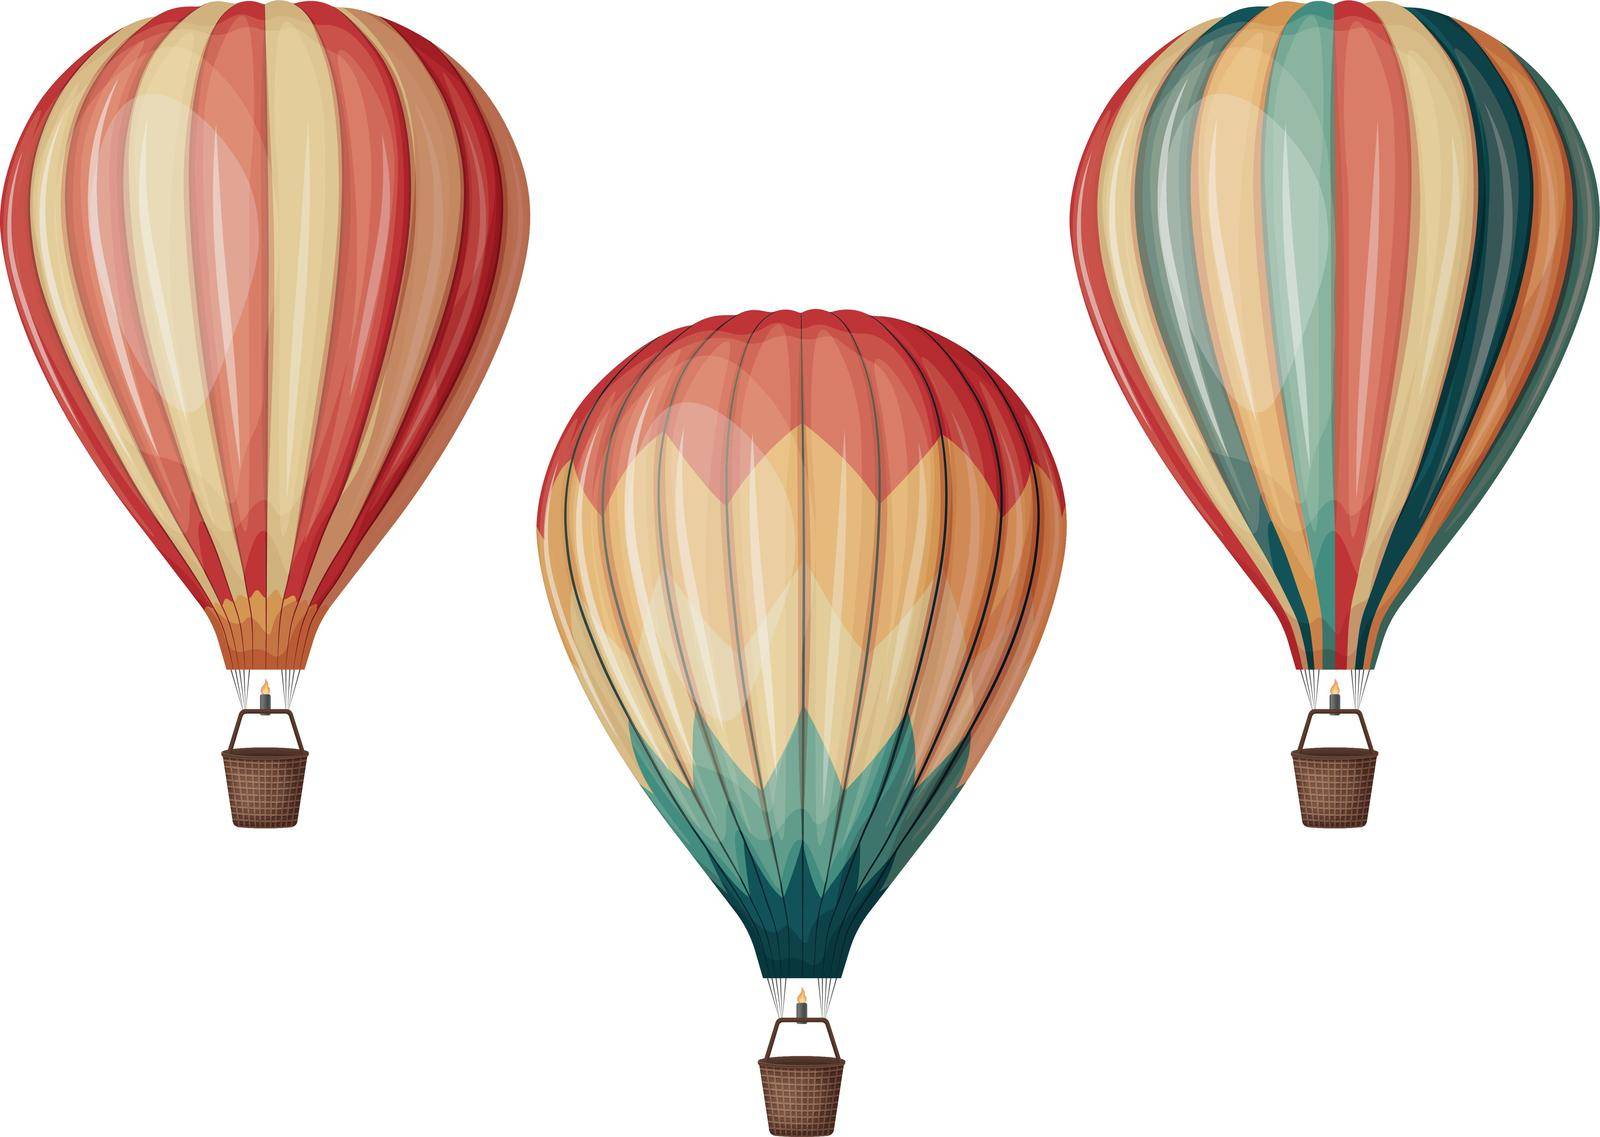 Balloons. A set of hot air balloons of different colors. Colored balloons flying across the sky. Vector illustration.